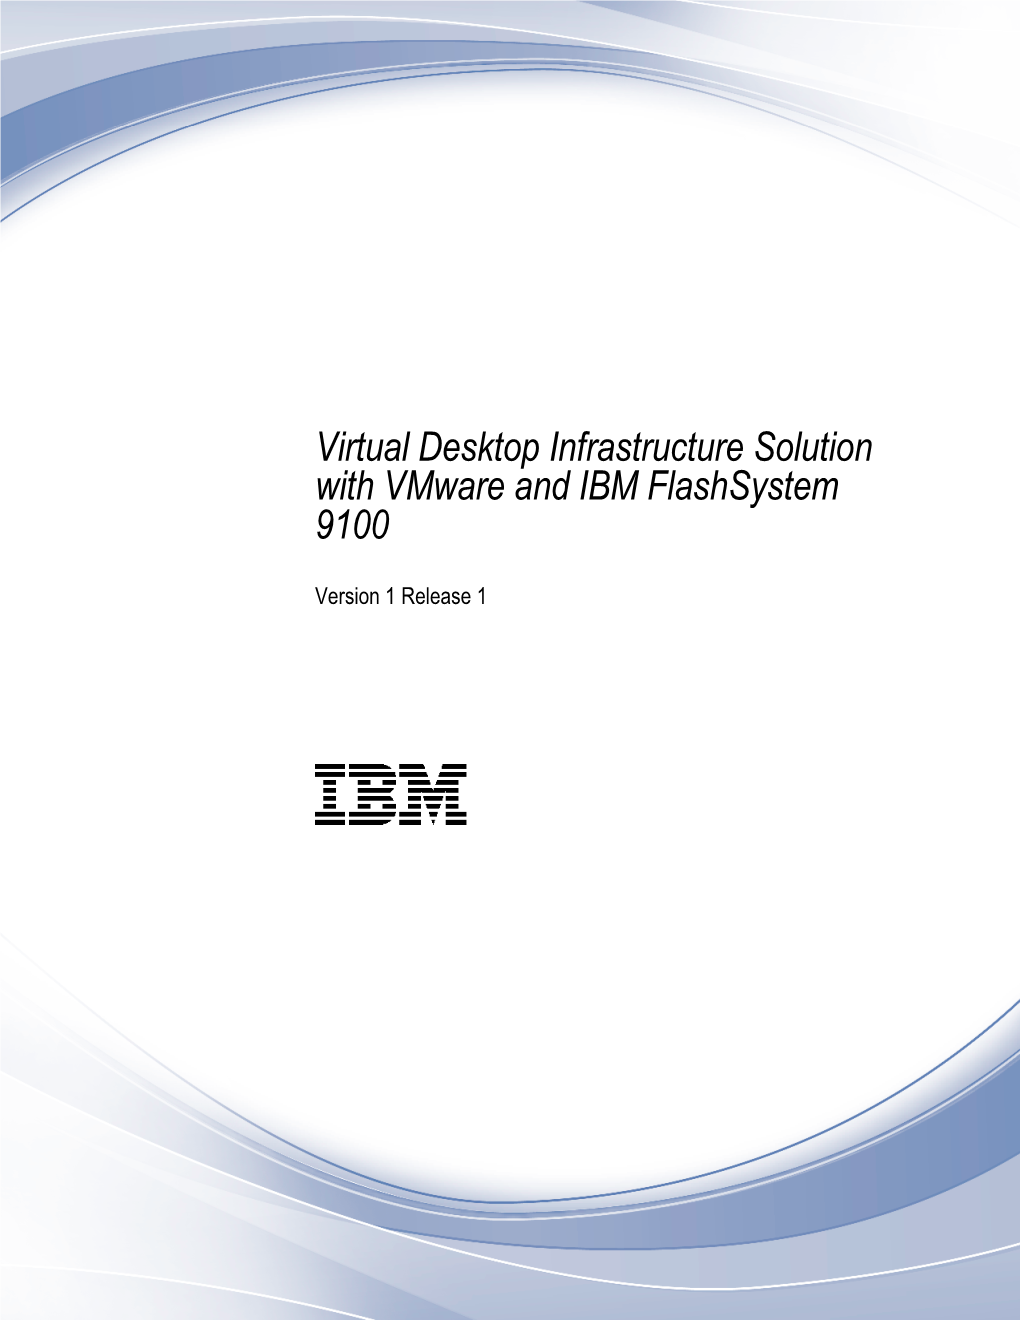 Virtual Desktop Infrastructure Solution with Vmware and IBM Flashsystem 9100